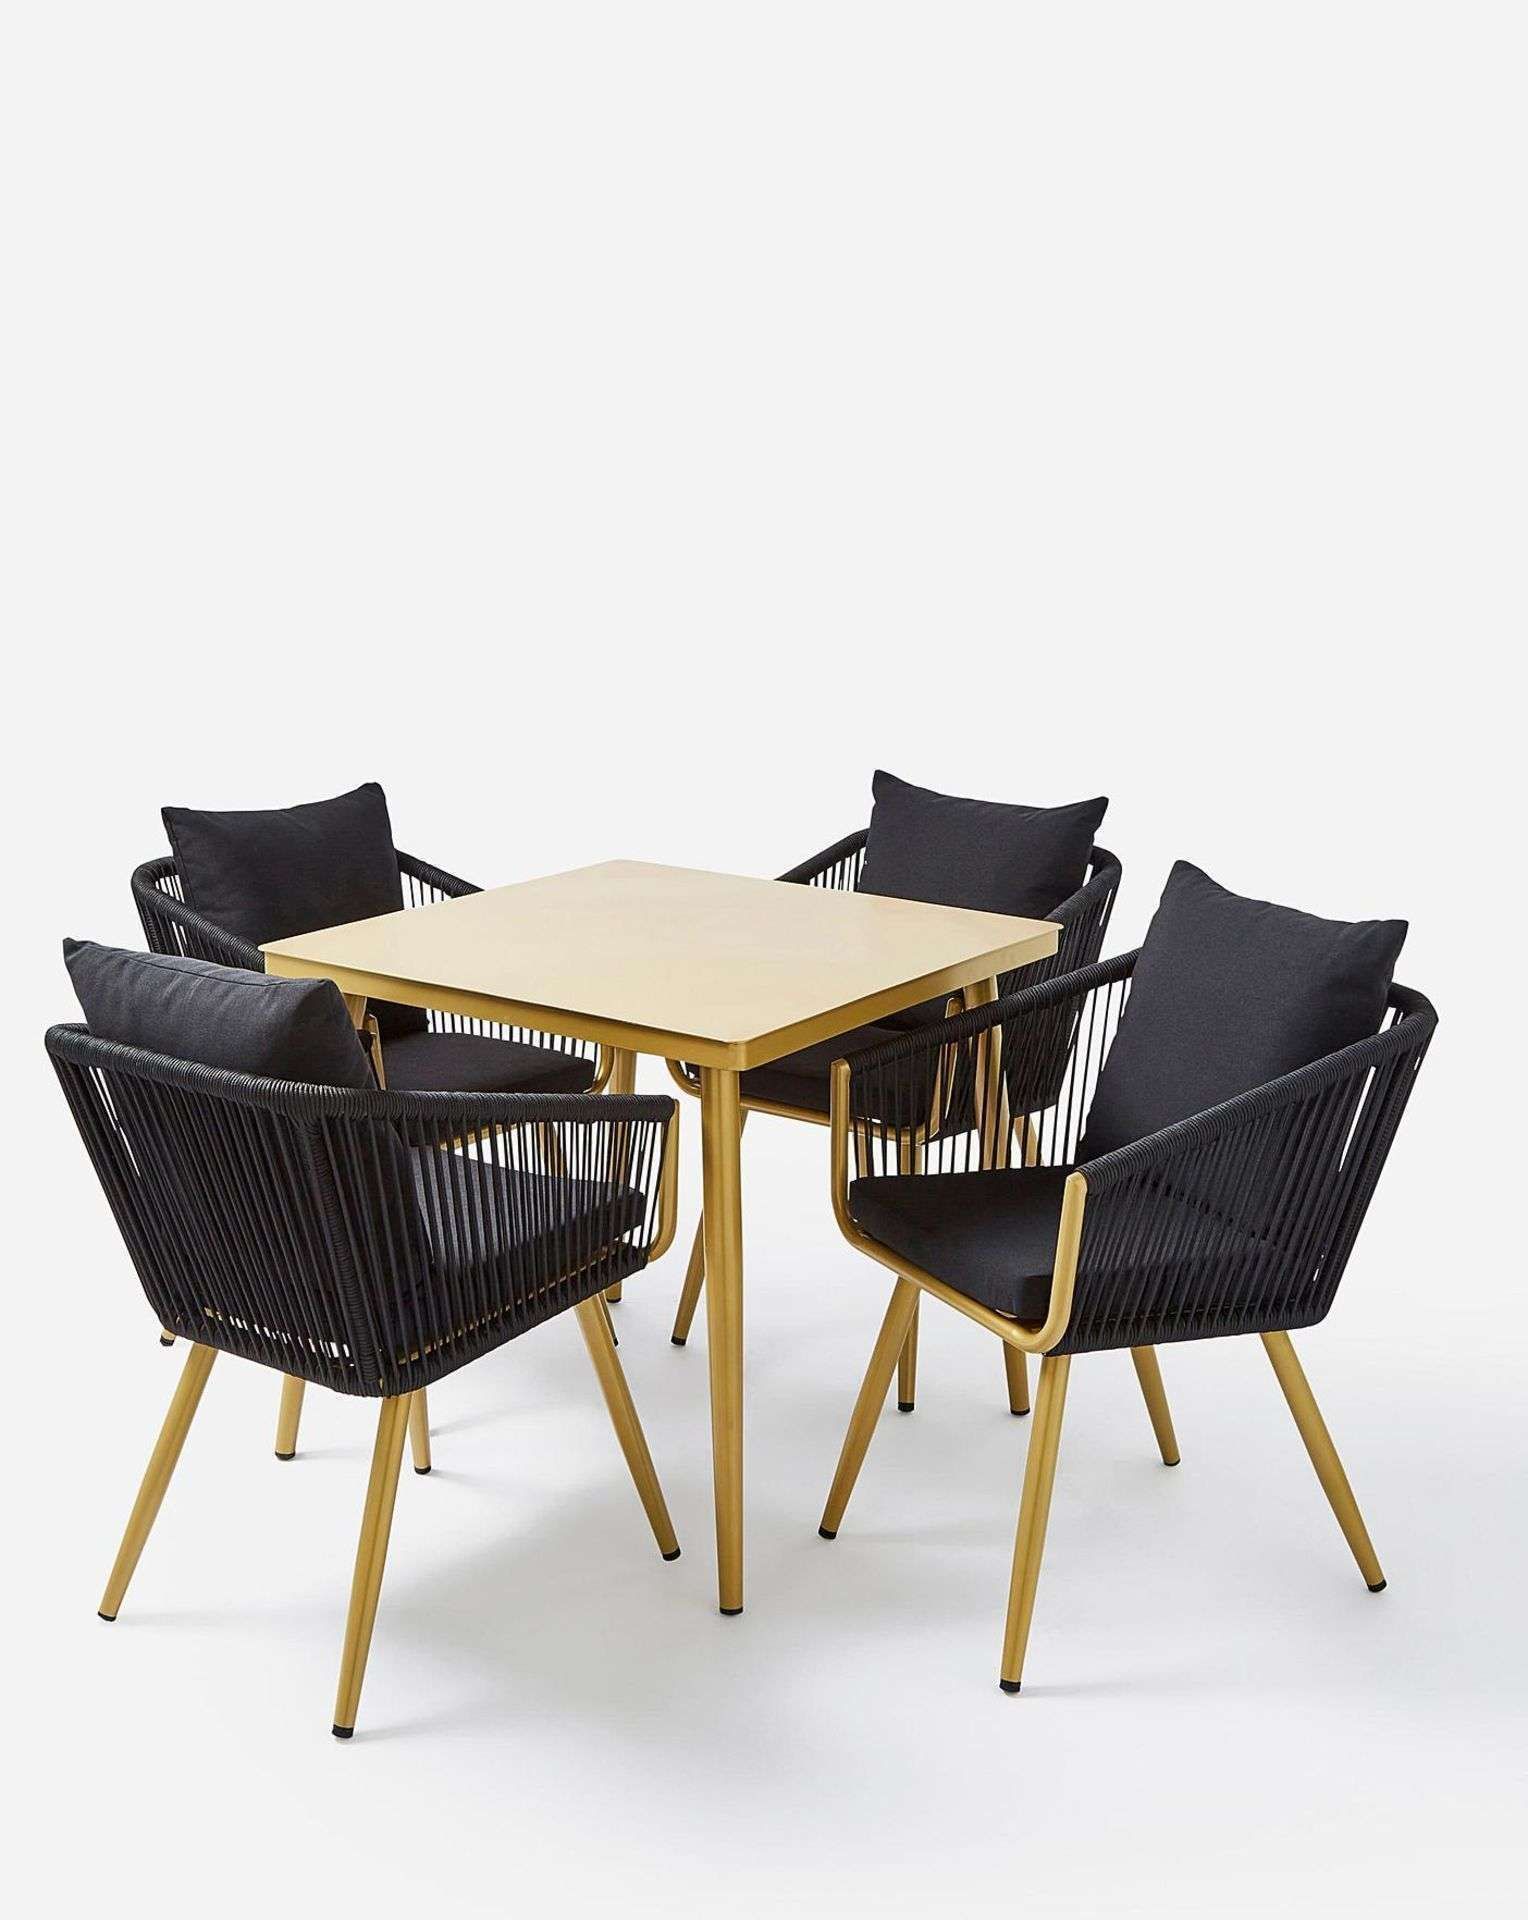 New & Packaged Joanna Hope Naya 4 Seater Dining Set. RRP £719. (P/W)This Exclusive Joanna Hope - Image 4 of 5